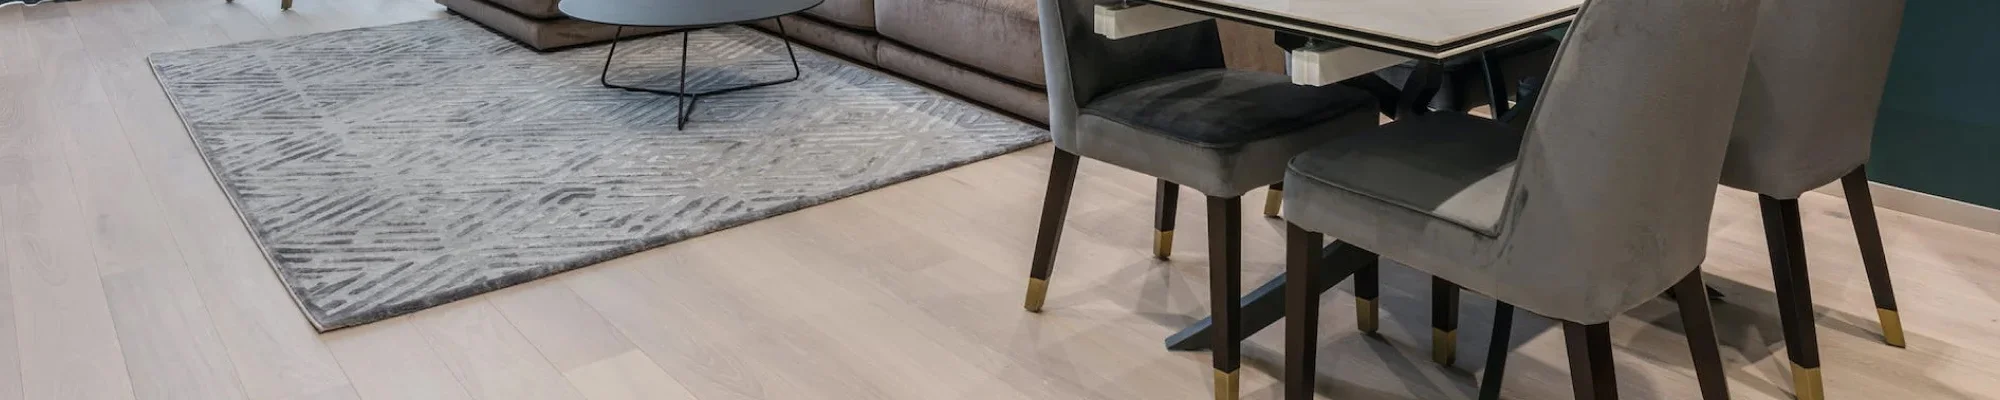 Learn about the benefits of area rugs from the professionals at Riemer Floors